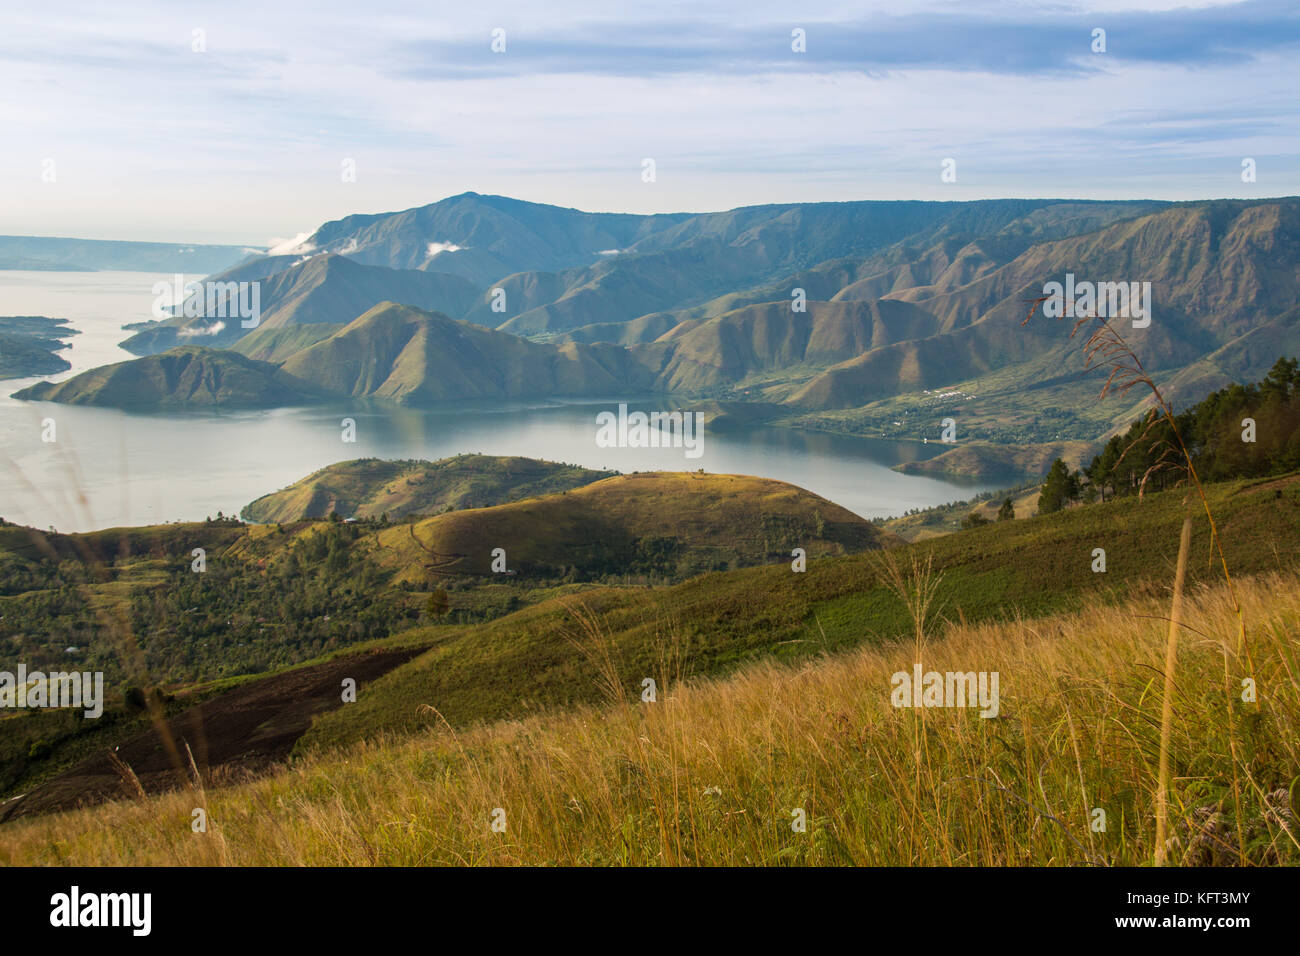 lake toba is a large natural lake occupying the caldera of a supervolcano, in the middle of the northern part of the Indonesian island of Sumatera. Stock Photo